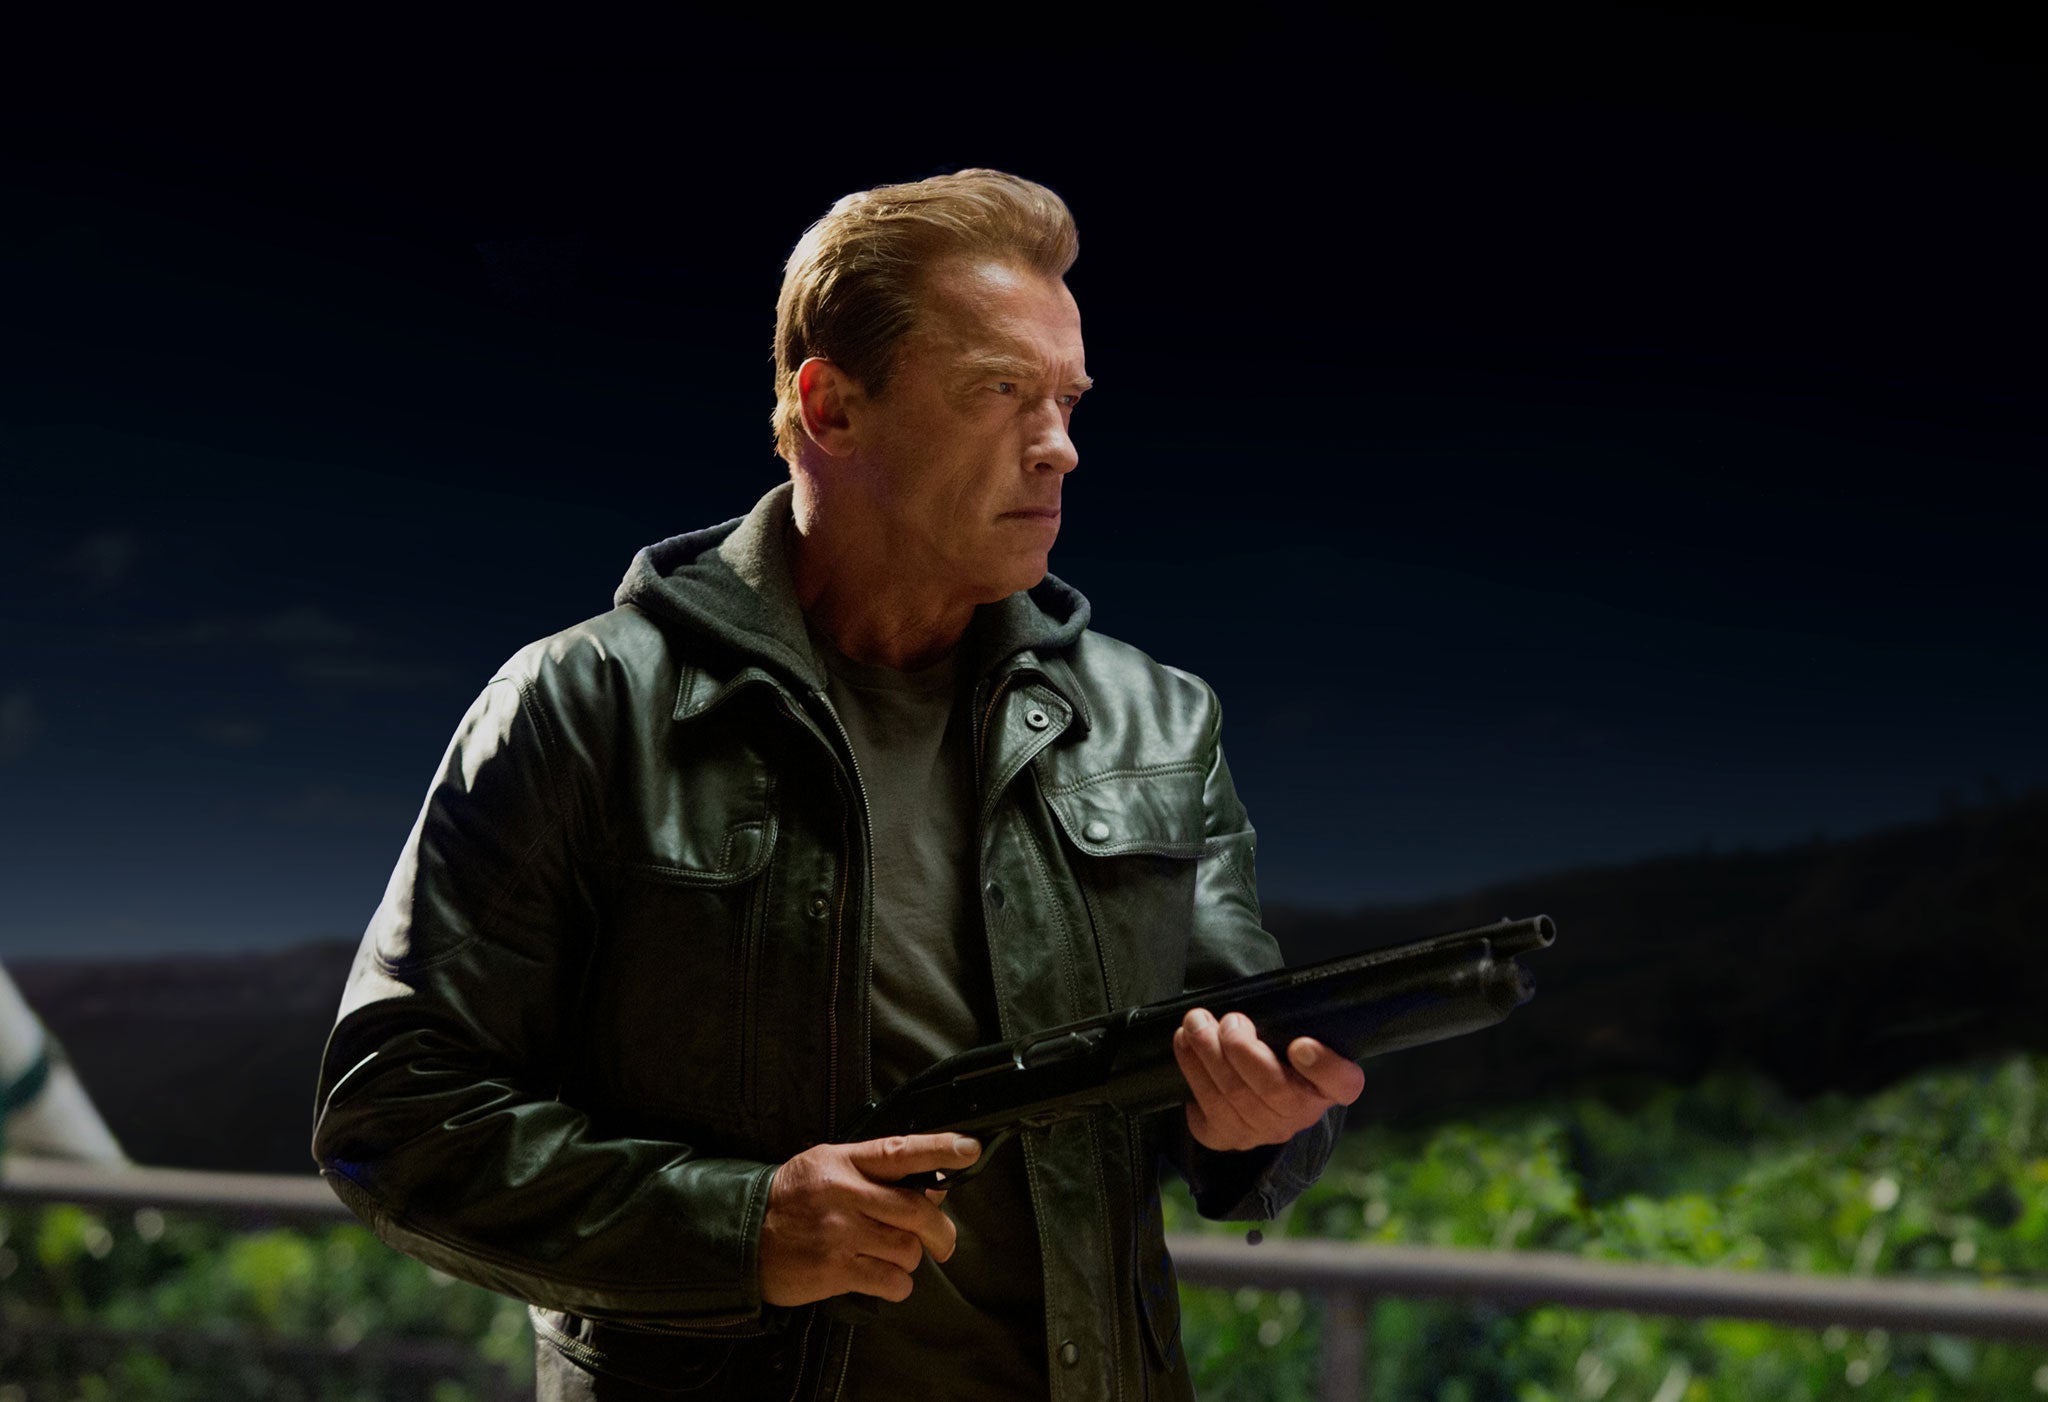 Terminator Genisys: Arnie remains doggedly true to his word as the man who said 'I'll be back', returning once more to protect Sarah Connor in a new instalment